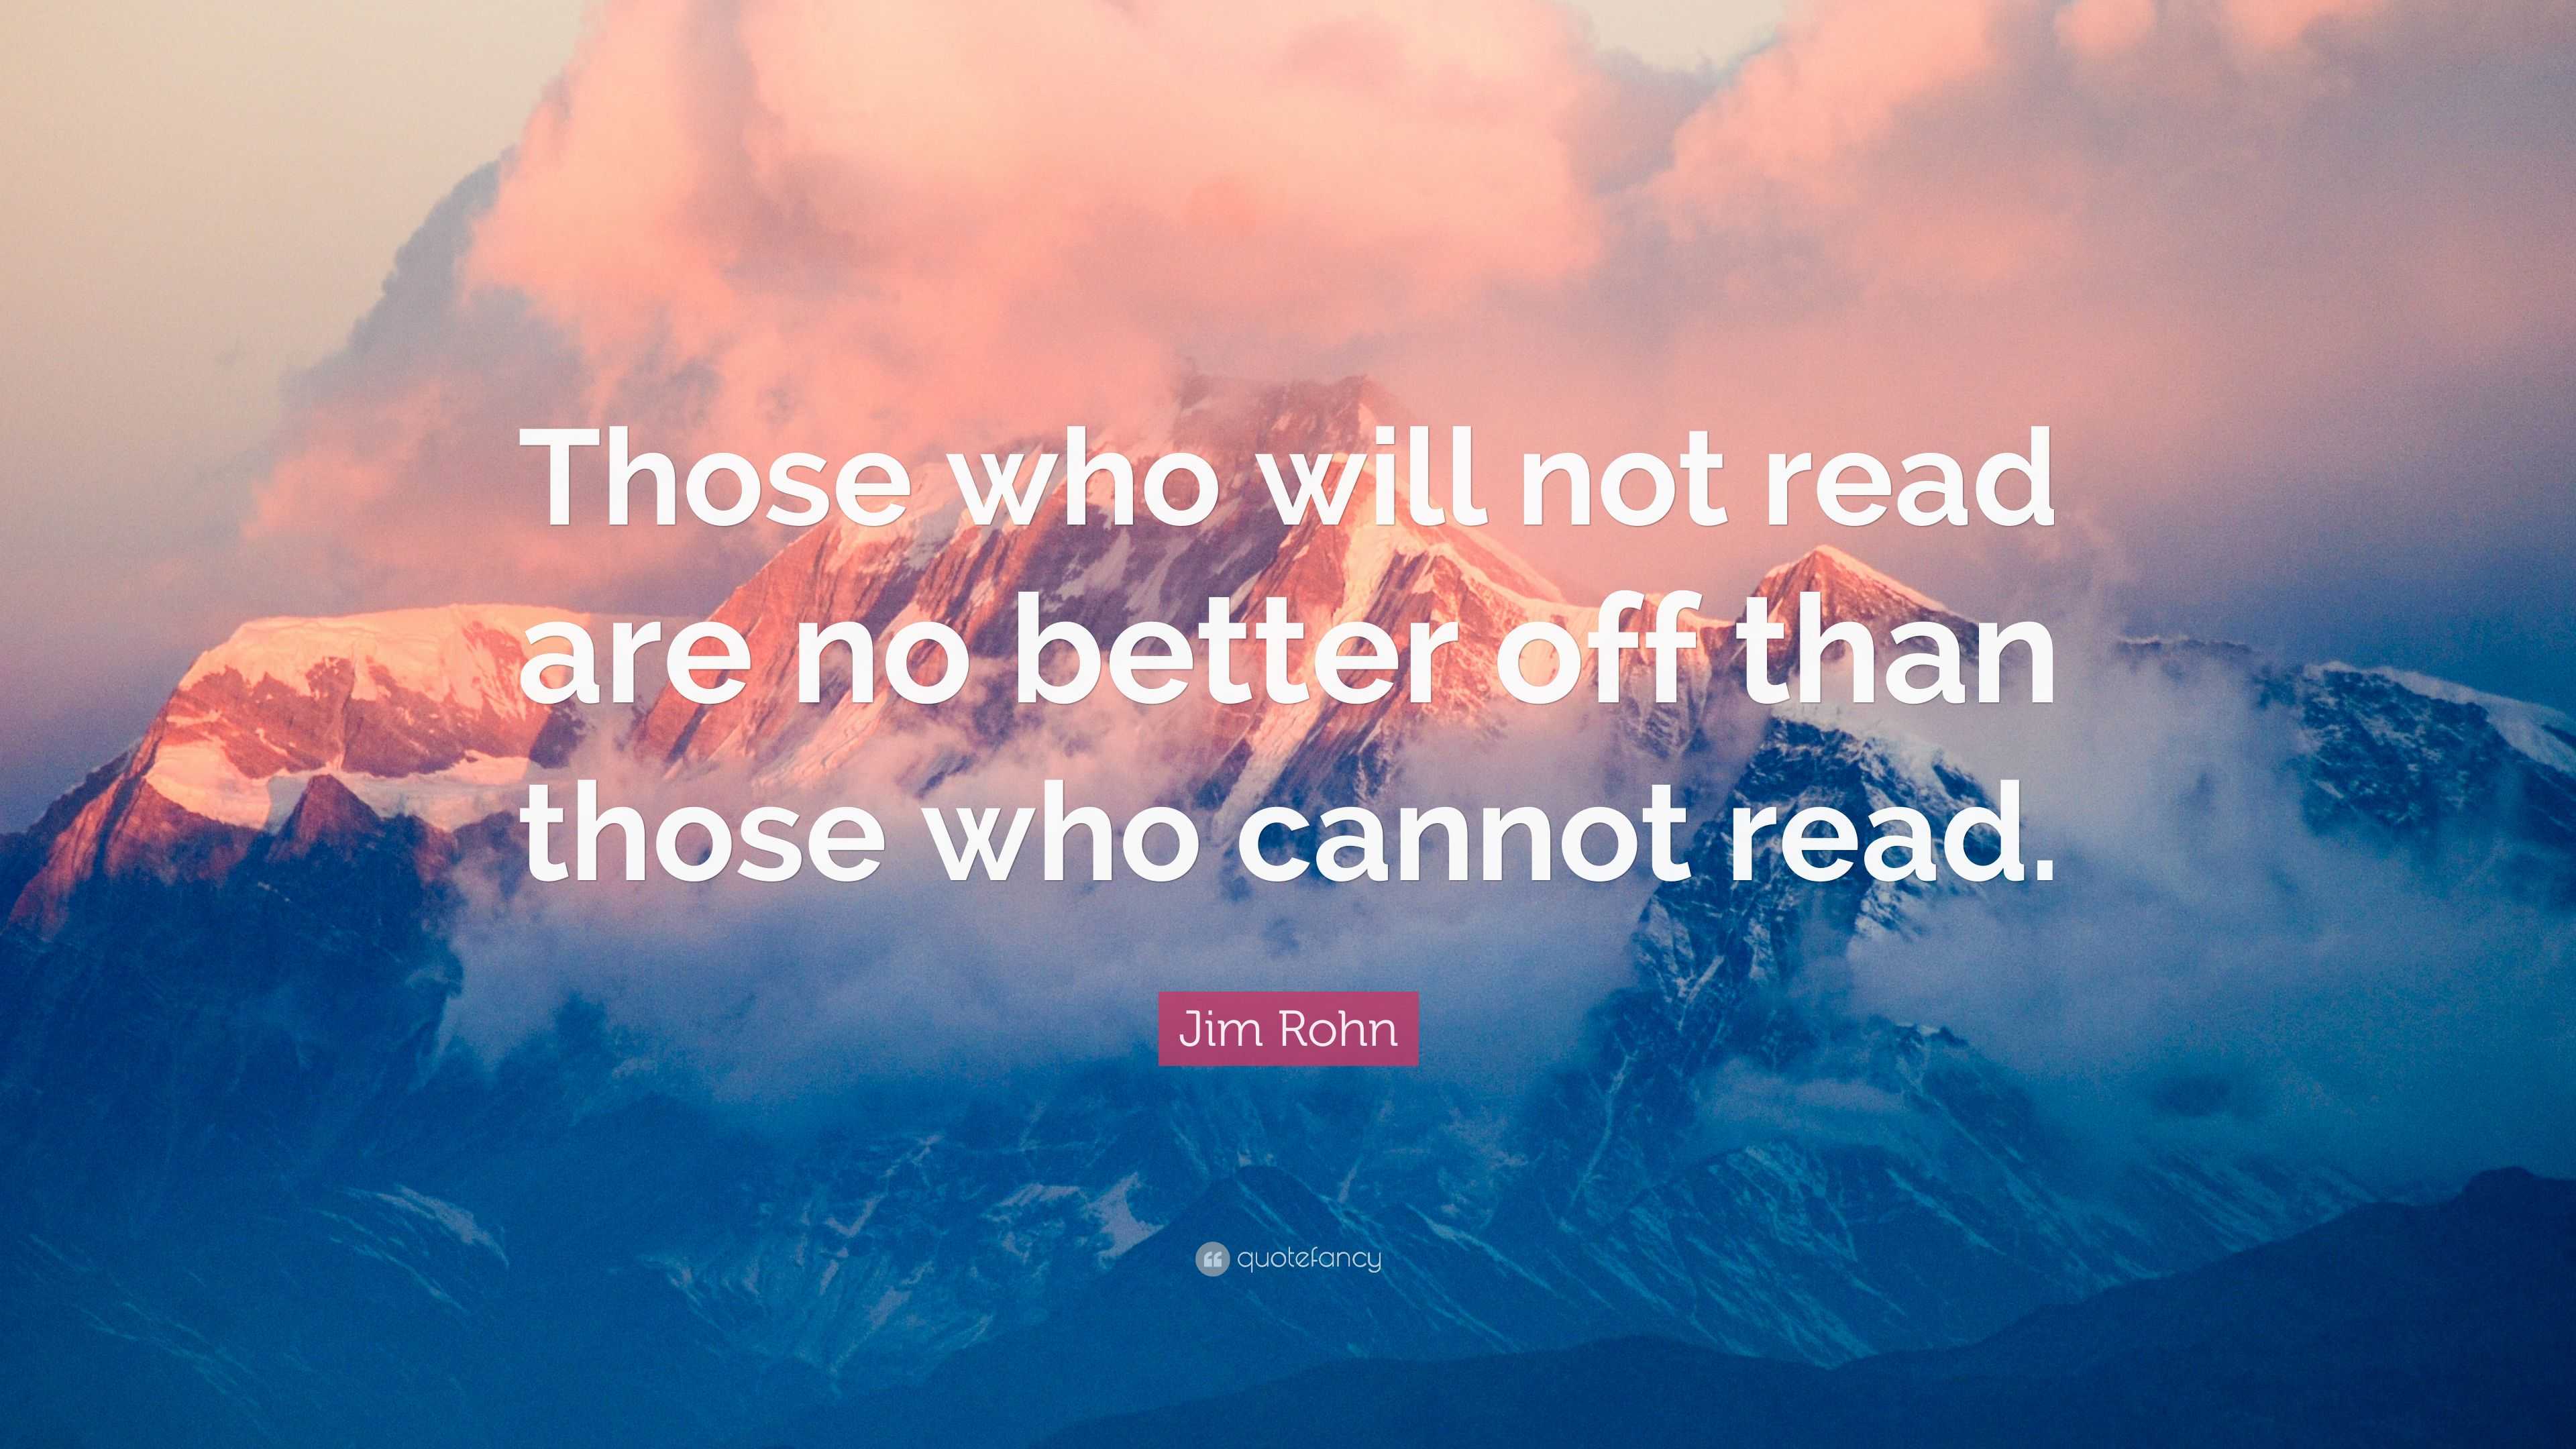 Jim Rohn Quote: “Those who will not read are no better off than those ...